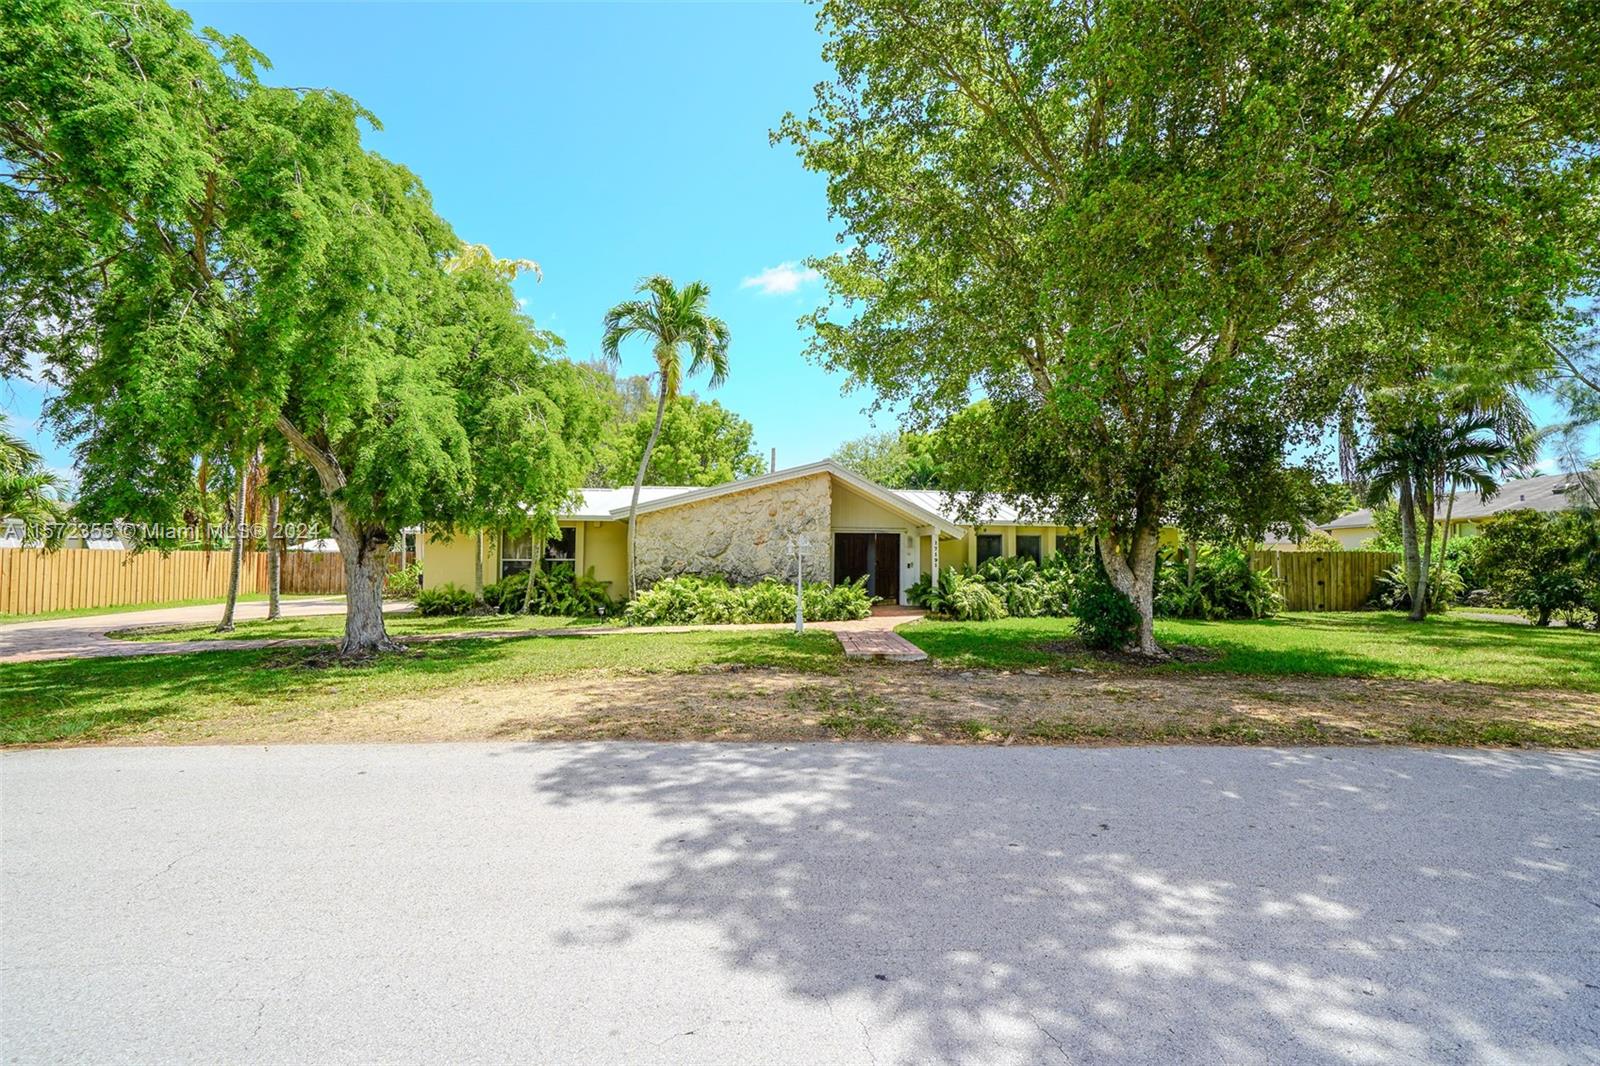 17191 SW 84th Ave, Palmetto Bay, Florida 33157, 5 Bedrooms Bedrooms, ,4 BathroomsBathrooms,Residential,For Sale,17191 SW 84th Ave,A11572355